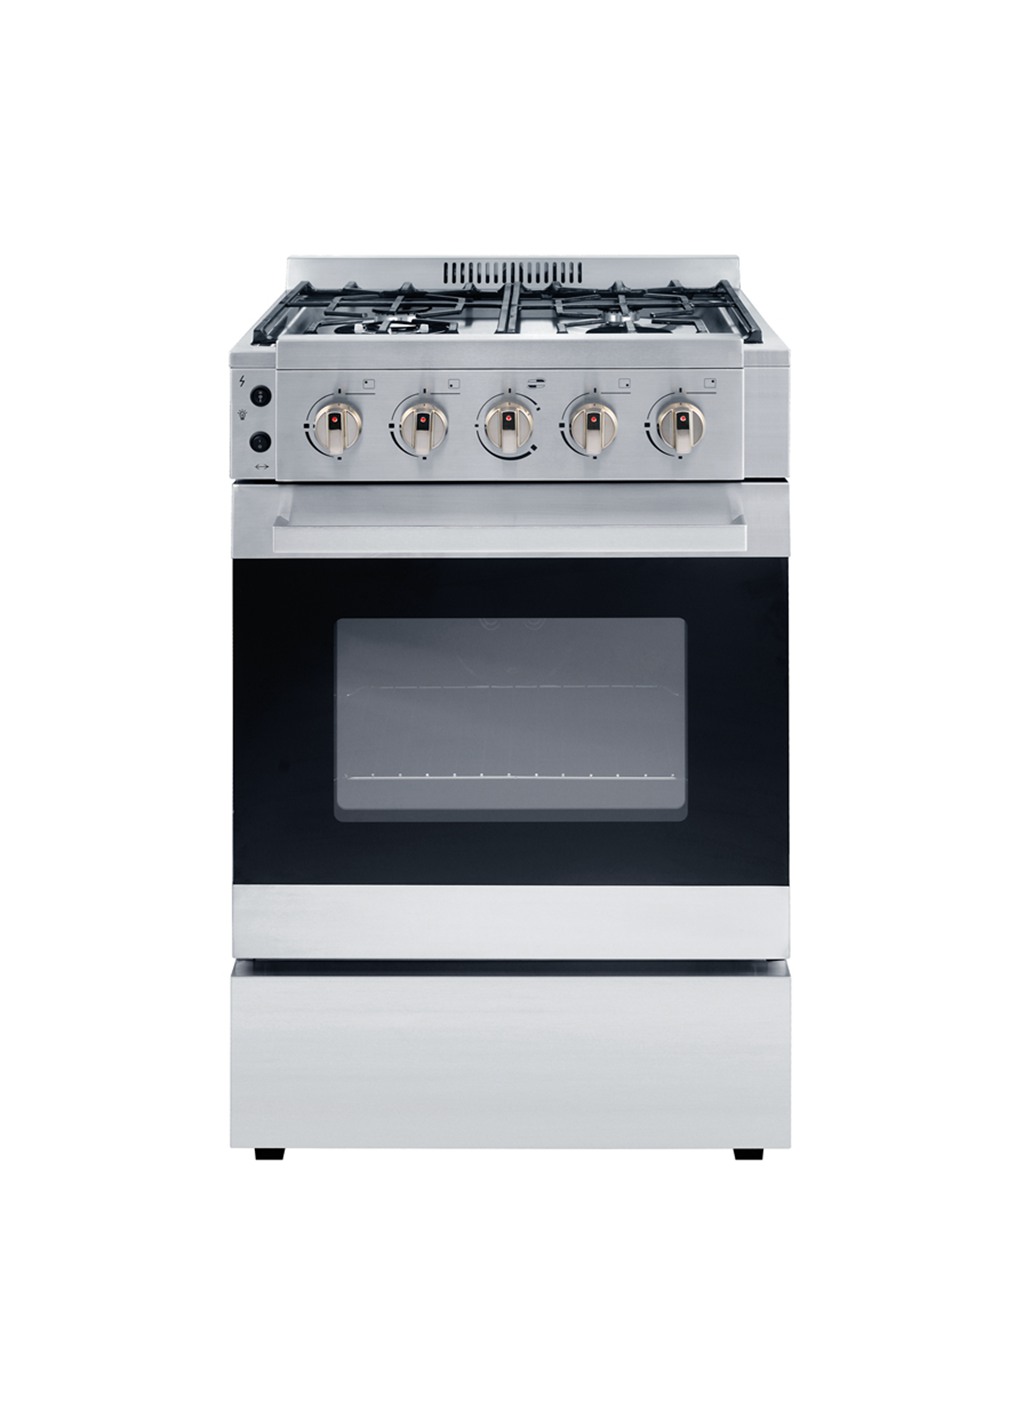 Freestanding Single Gas Oven with 4Burners